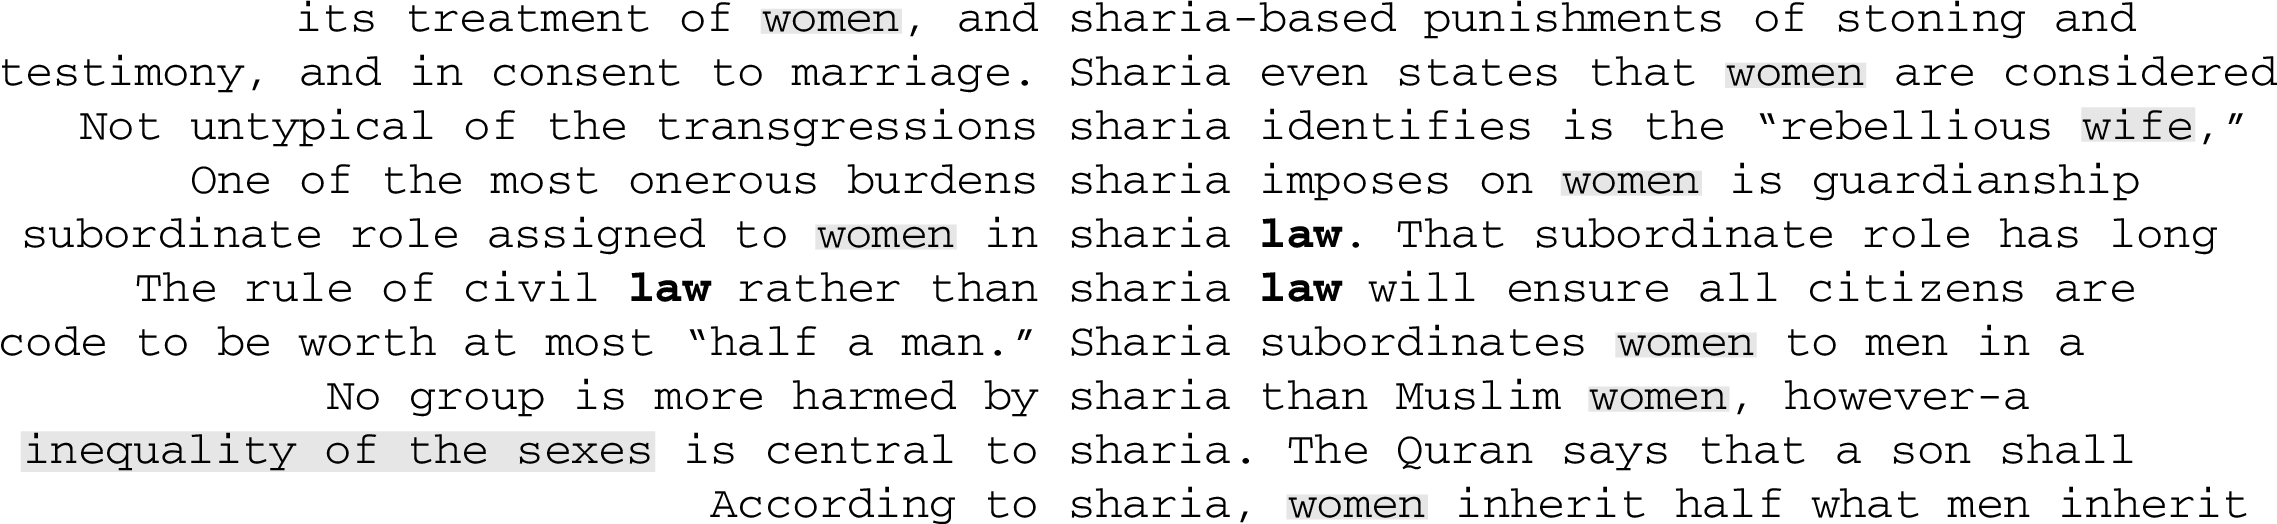 10 randomly generated concordance lines for ‘sharia’ from Heretic highlighting the collocates, ‘law’ and ‘women’.